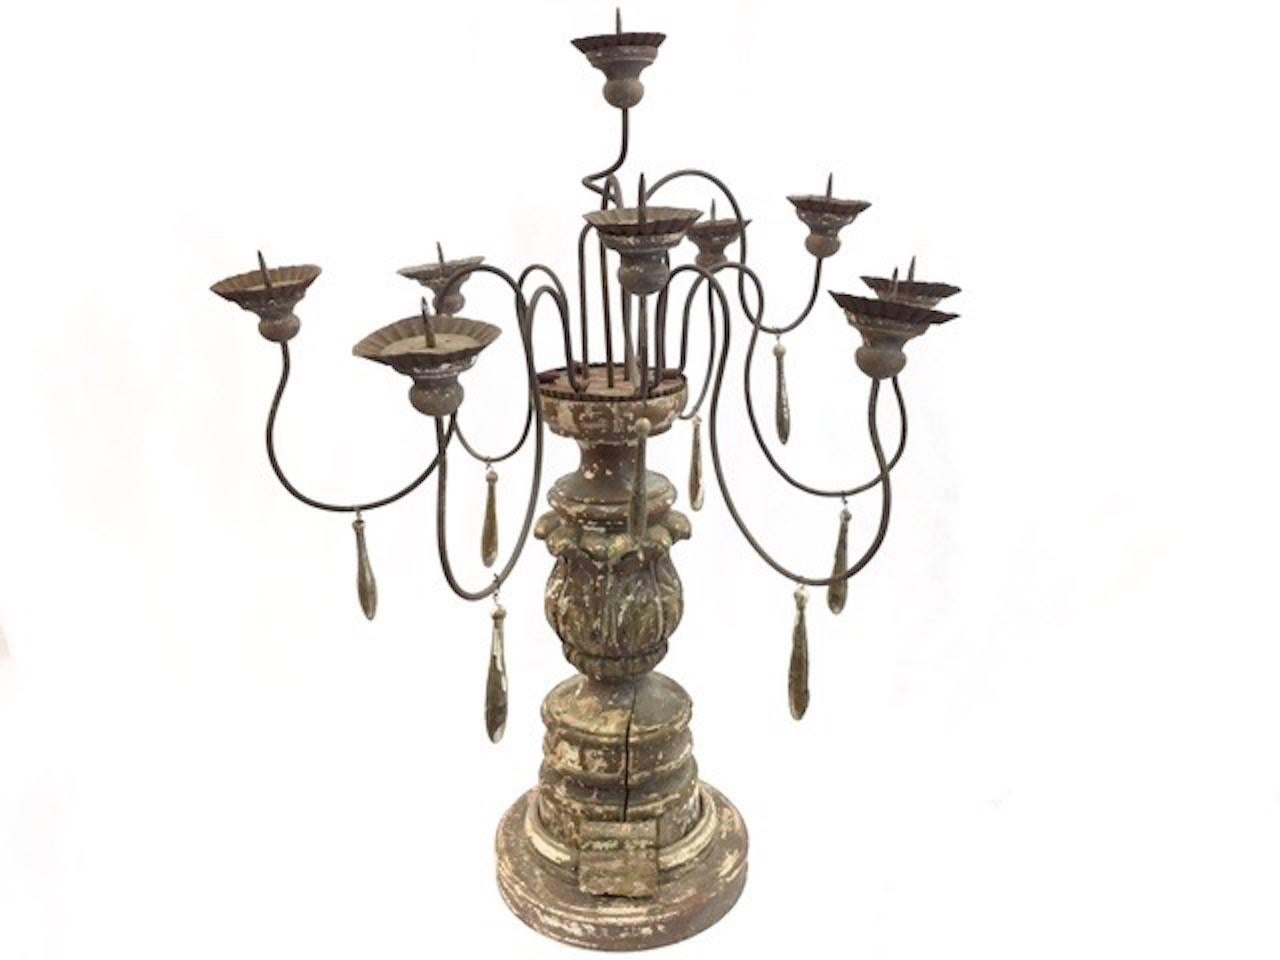 French Provincial Antique Portuguese Candelabra with Polychrome Finish and Rusted Iron Details For Sale